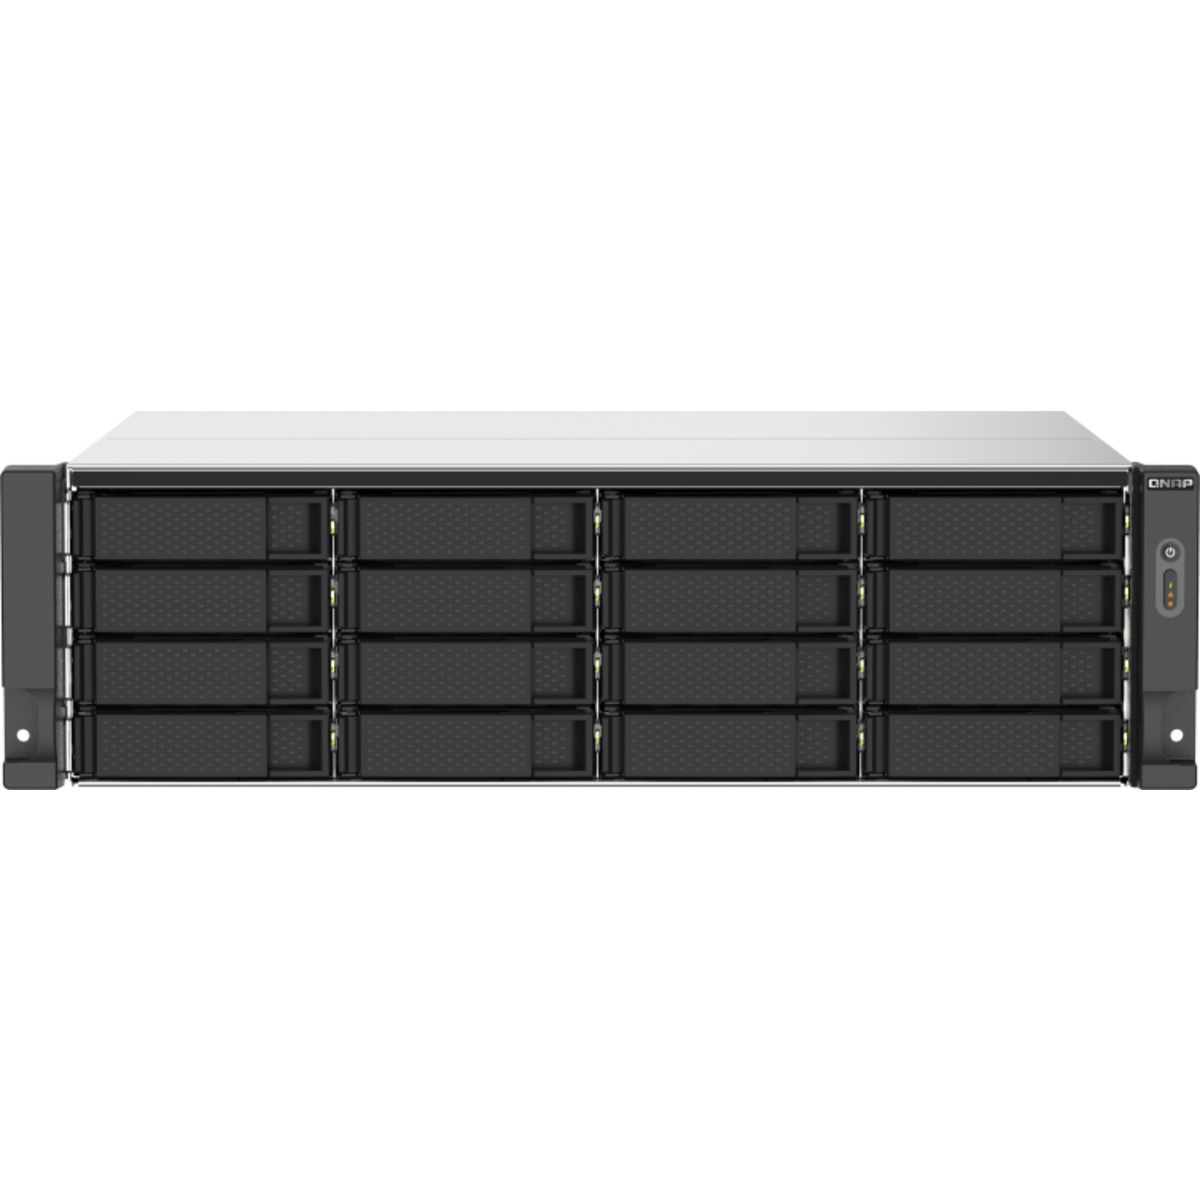 QNAP TS-1673AU-RP 150tb 16-Bay RackMount Multimedia / Power User / Business NAS - Network Attached Storage Device 15x10tb Western Digital Gold WD102KRYZ 3.5 7200rpm SATA 6Gb/s HDD ENTERPRISE Class Drives Installed - Burn-In Tested - FREE RAM UPGRADE TS-1673AU-RP